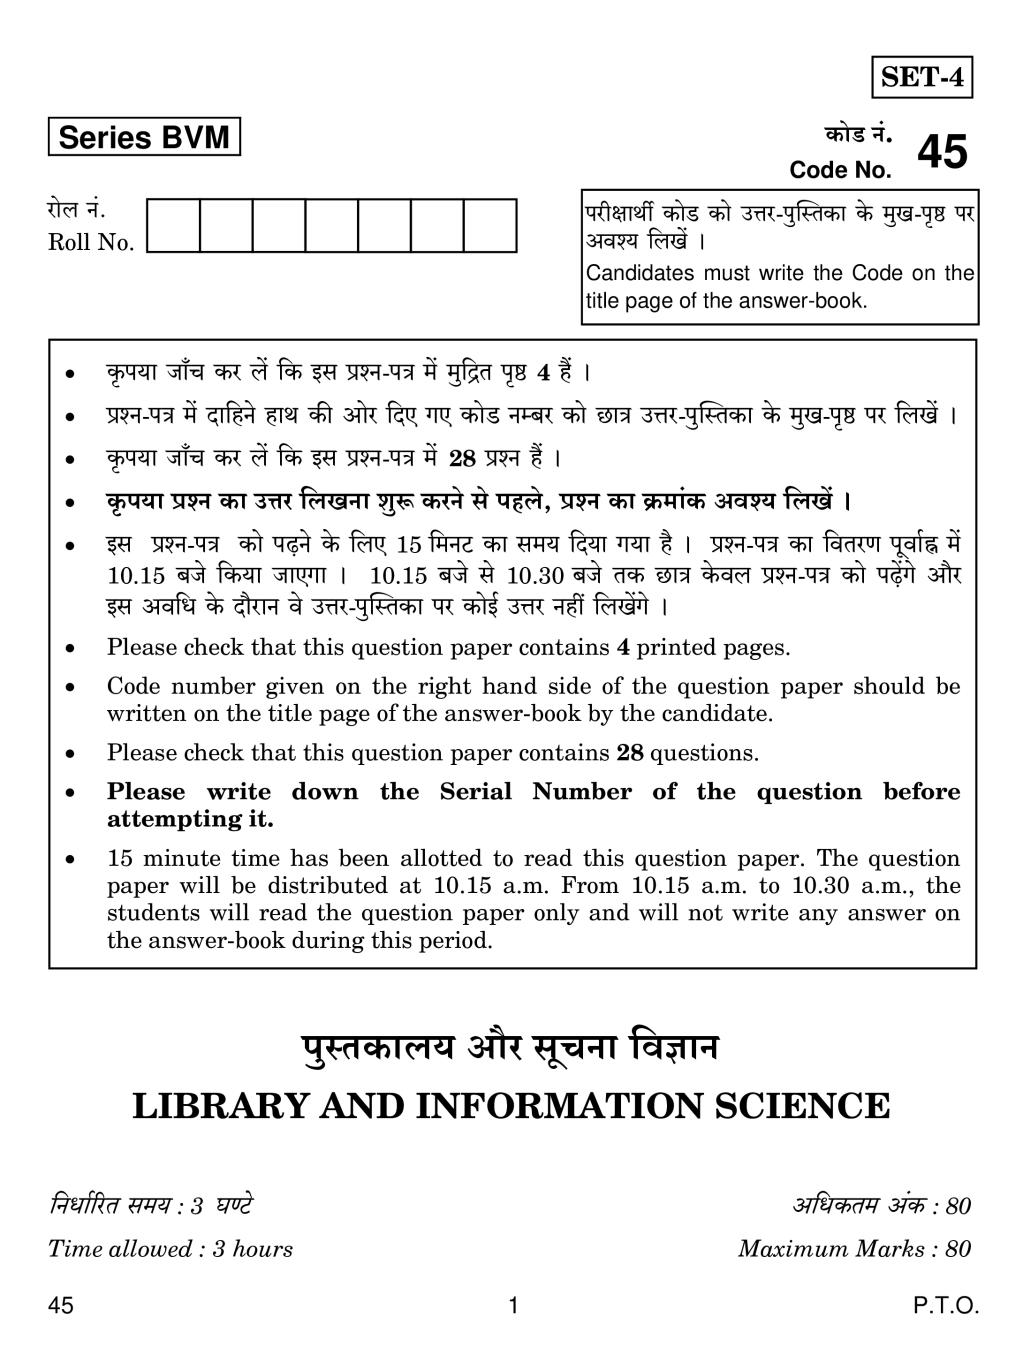 CBSE Class 12 Library and Information Science Question Paper 2019 - Page 1